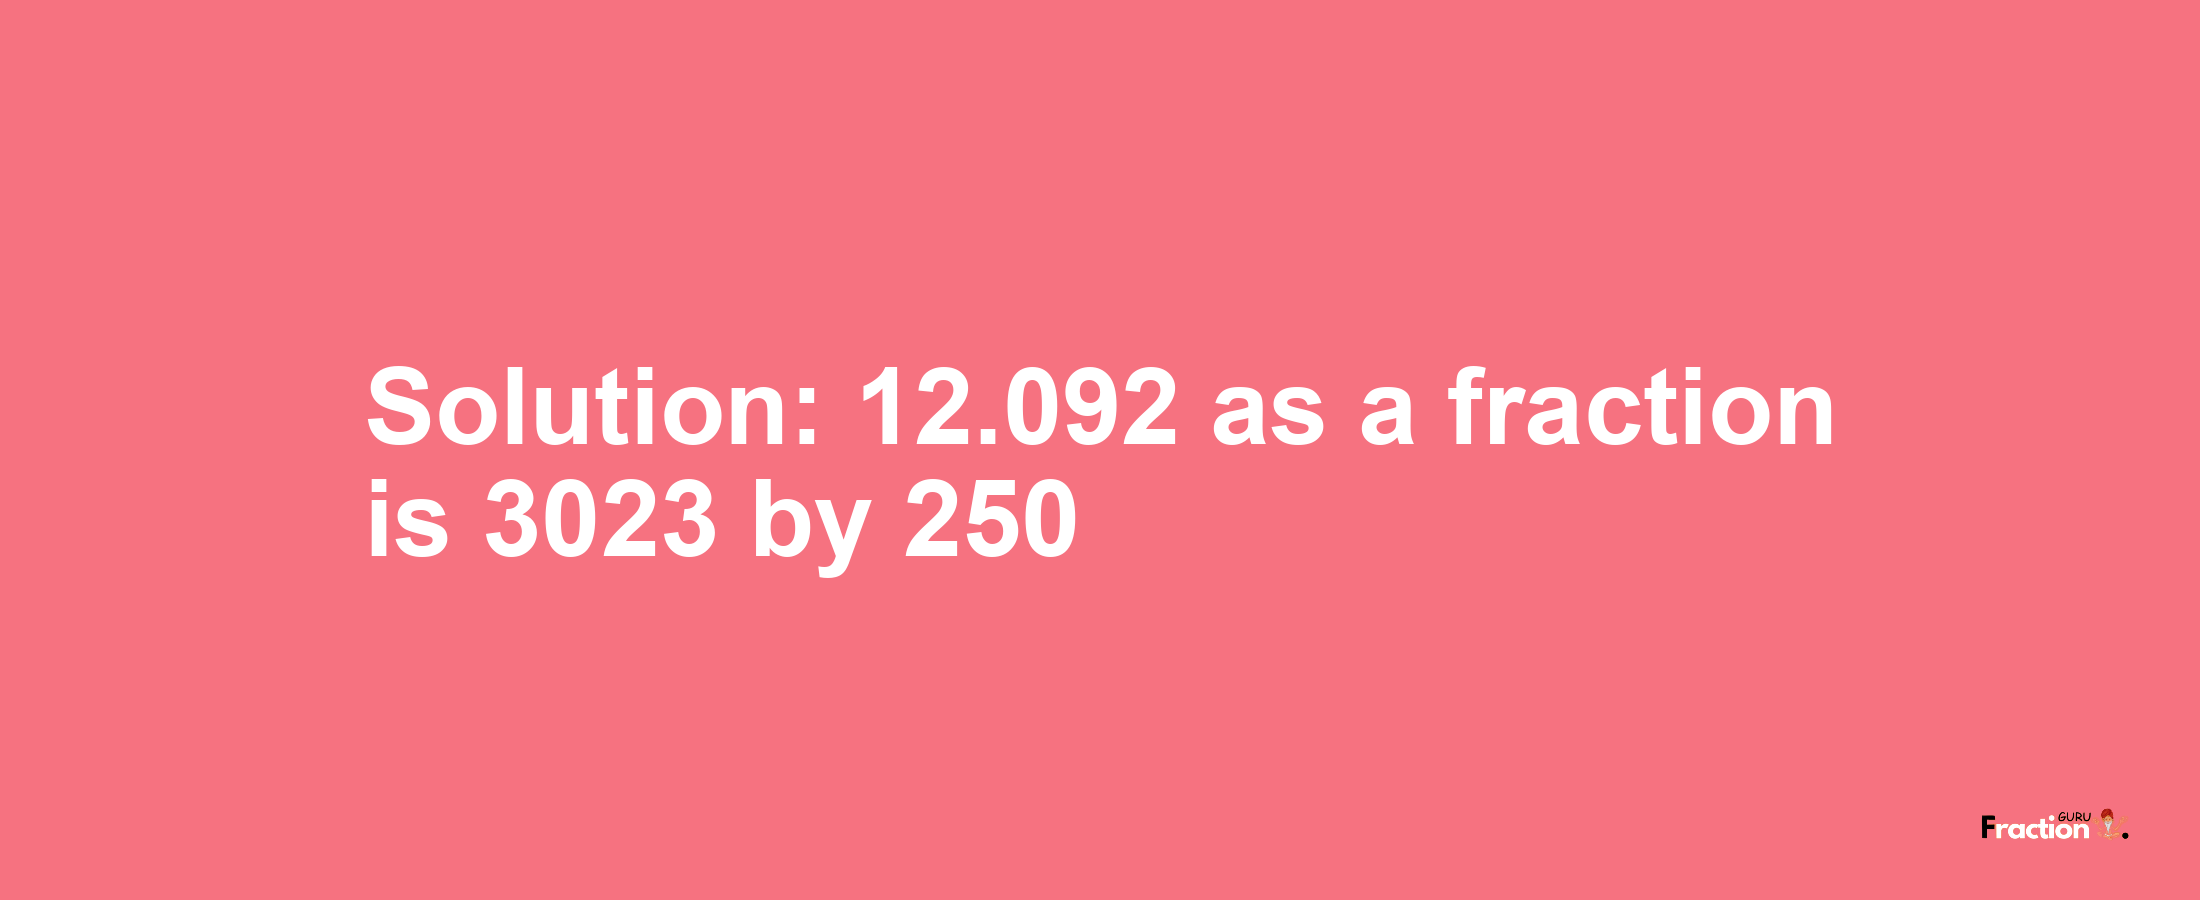 Solution:12.092 as a fraction is 3023/250